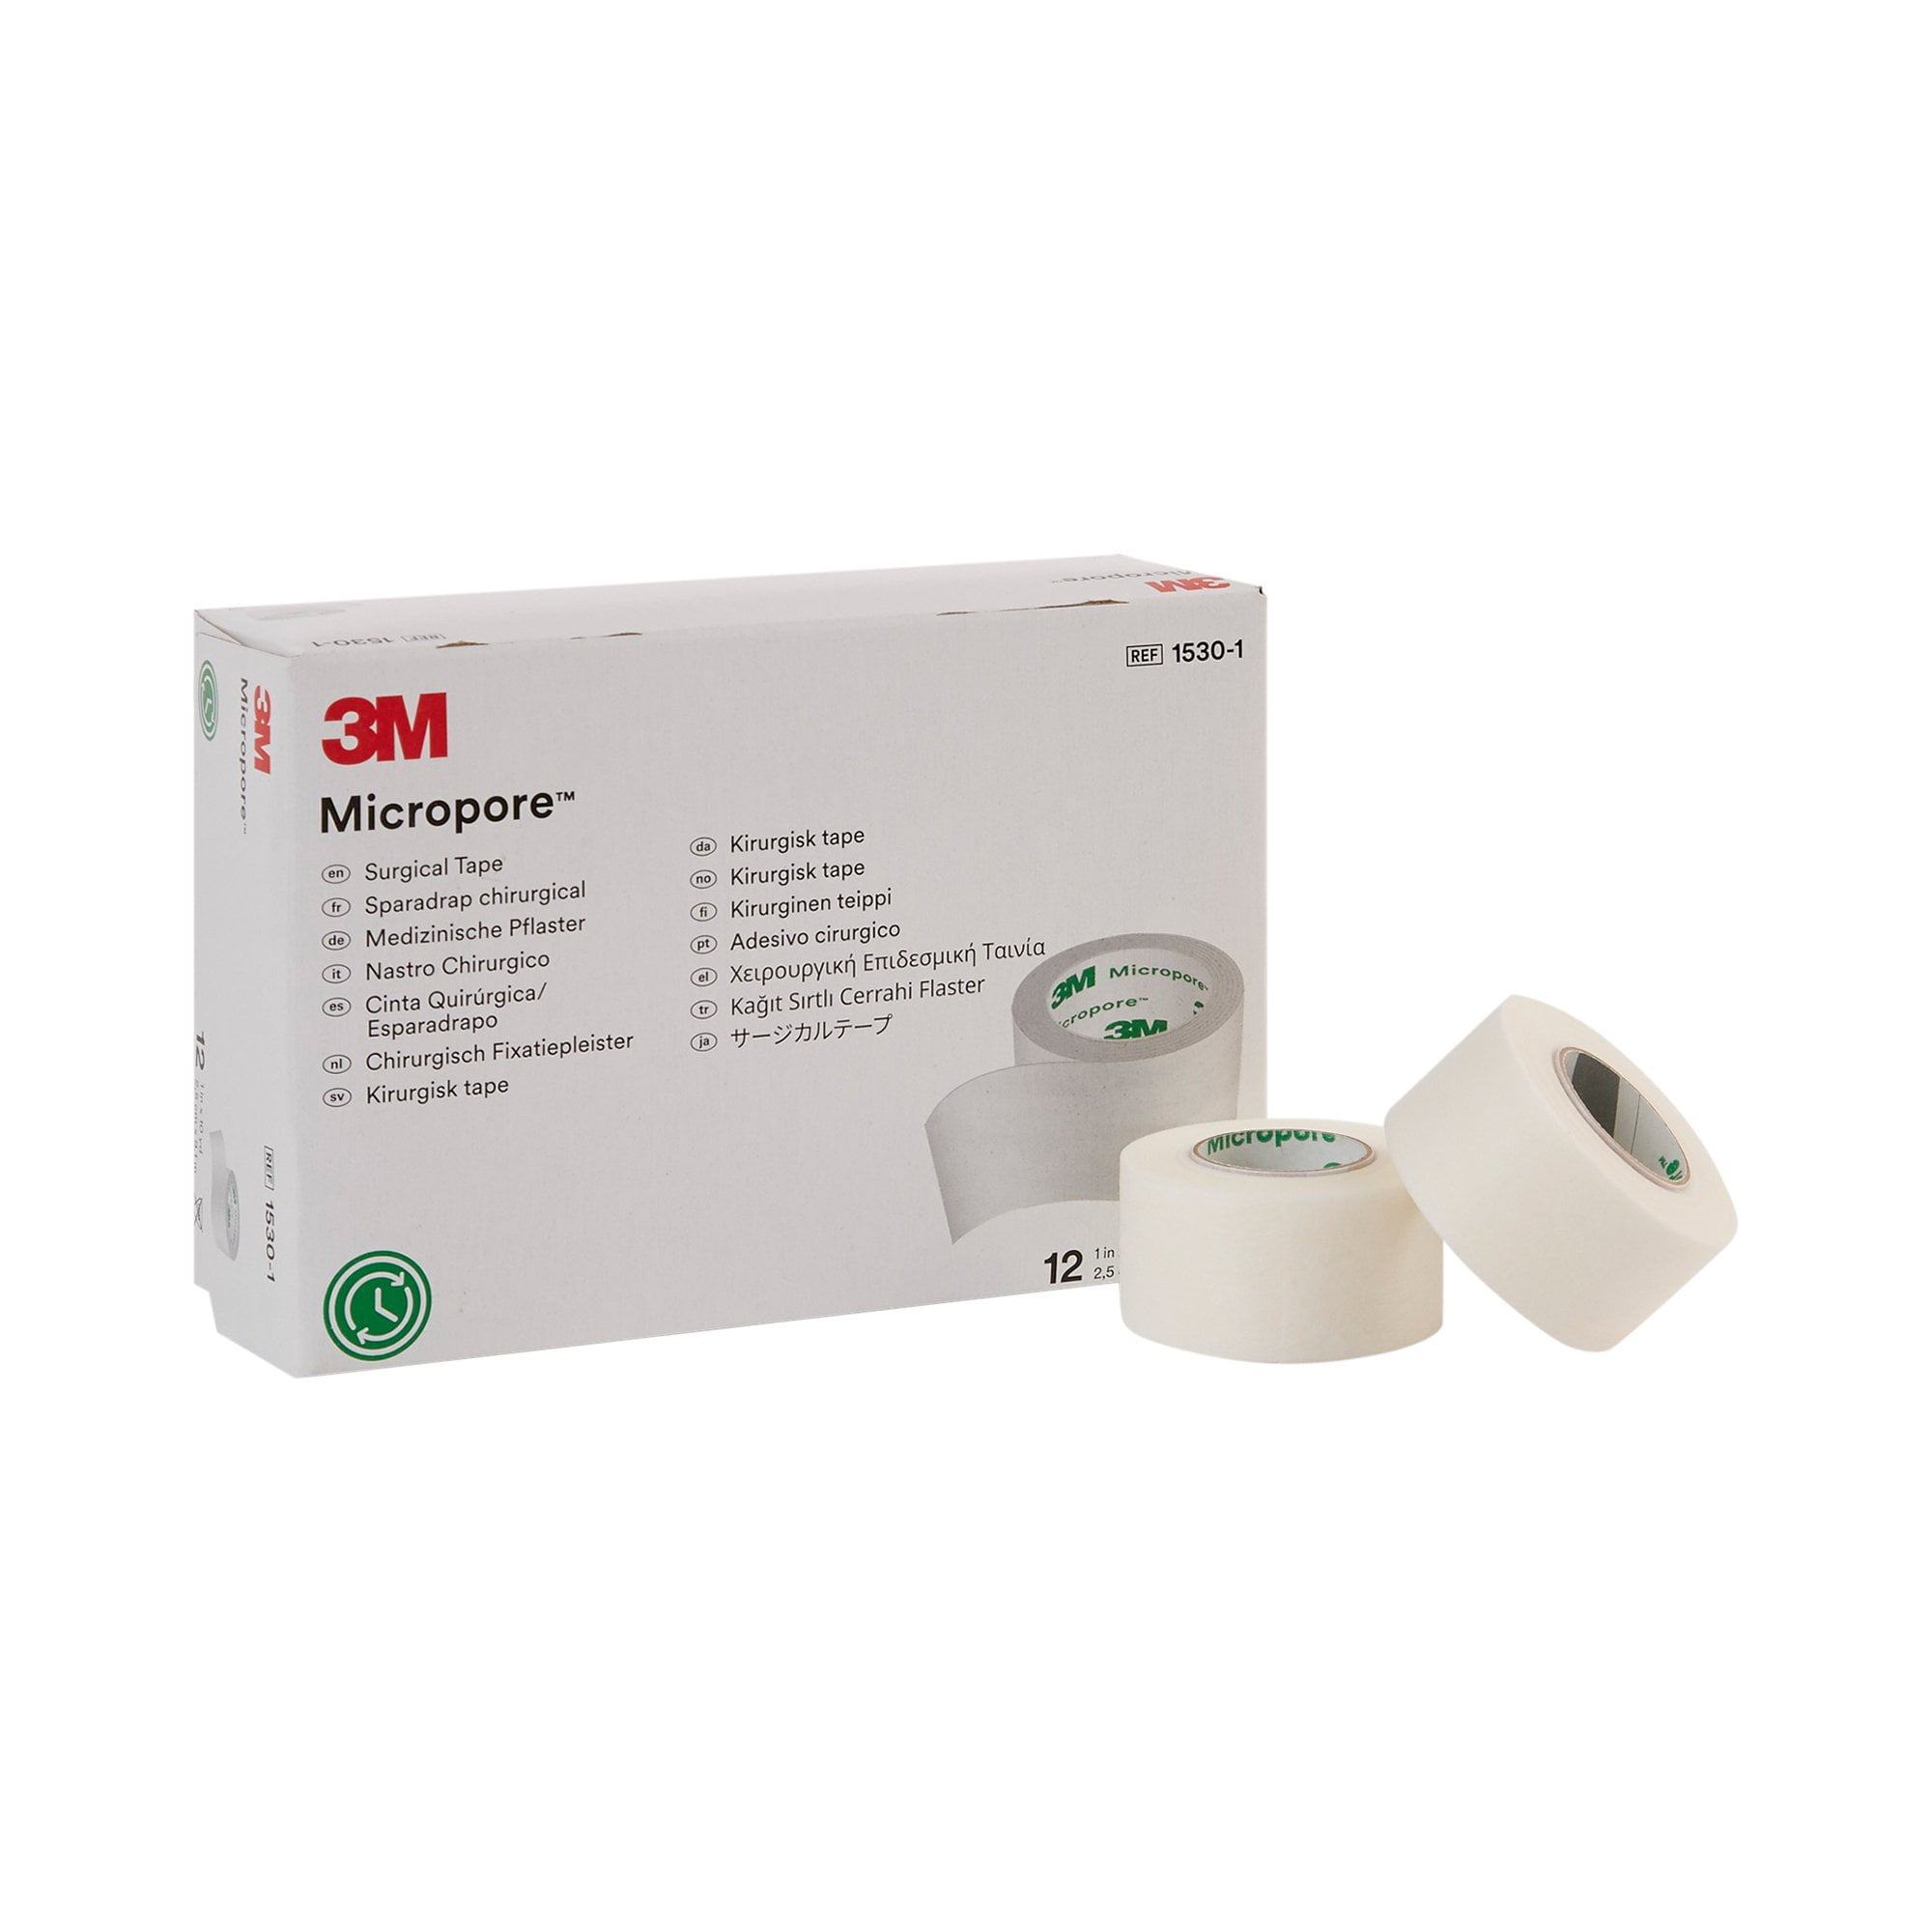 3M Nexcare Micropore Paper First Aid Tape, Size: 2 Inches X 10